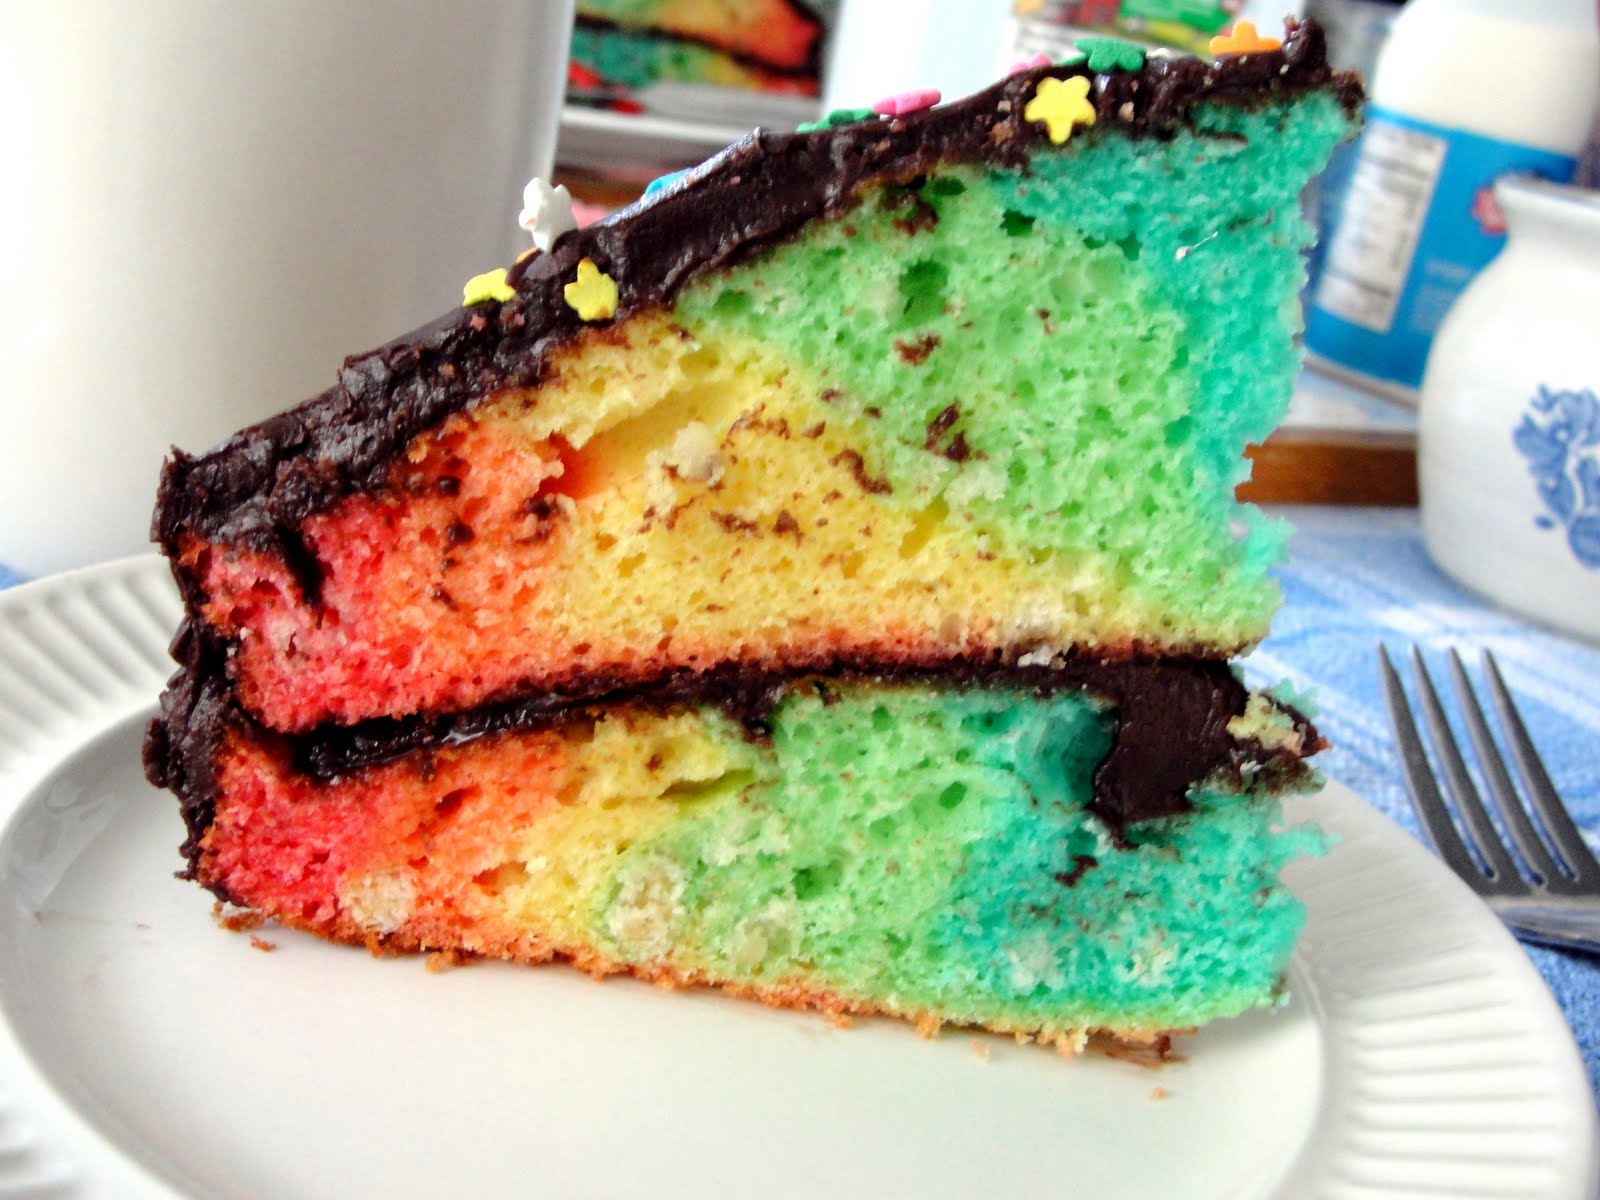 Rainbow Cake with Chocolate Frosting